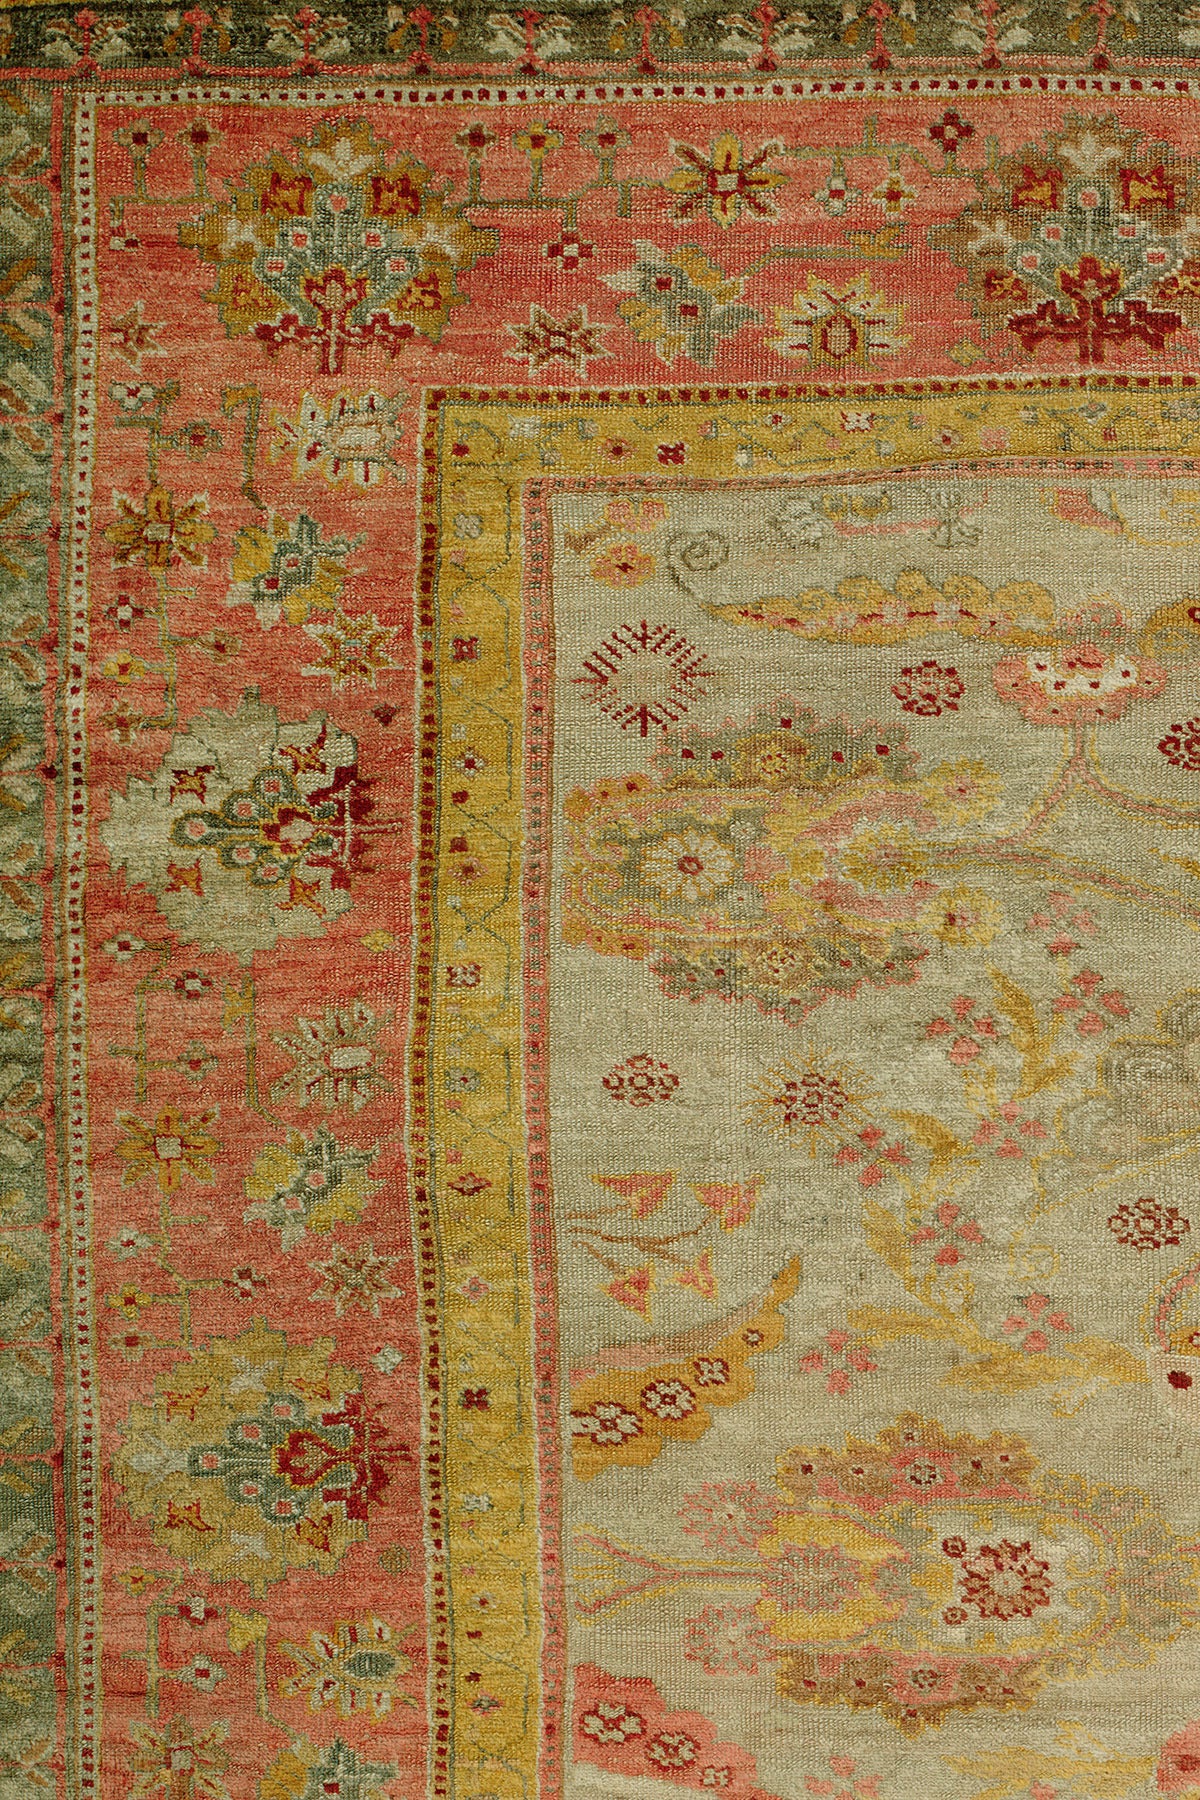 Breathtaking late 19th century Turkish Angora wool Oushak rug.
Characteristics of antique Oushak rugs are relatively looser knots and tend to have monumental scales, relaxed structures and playful palettes that still make them remain a favorite